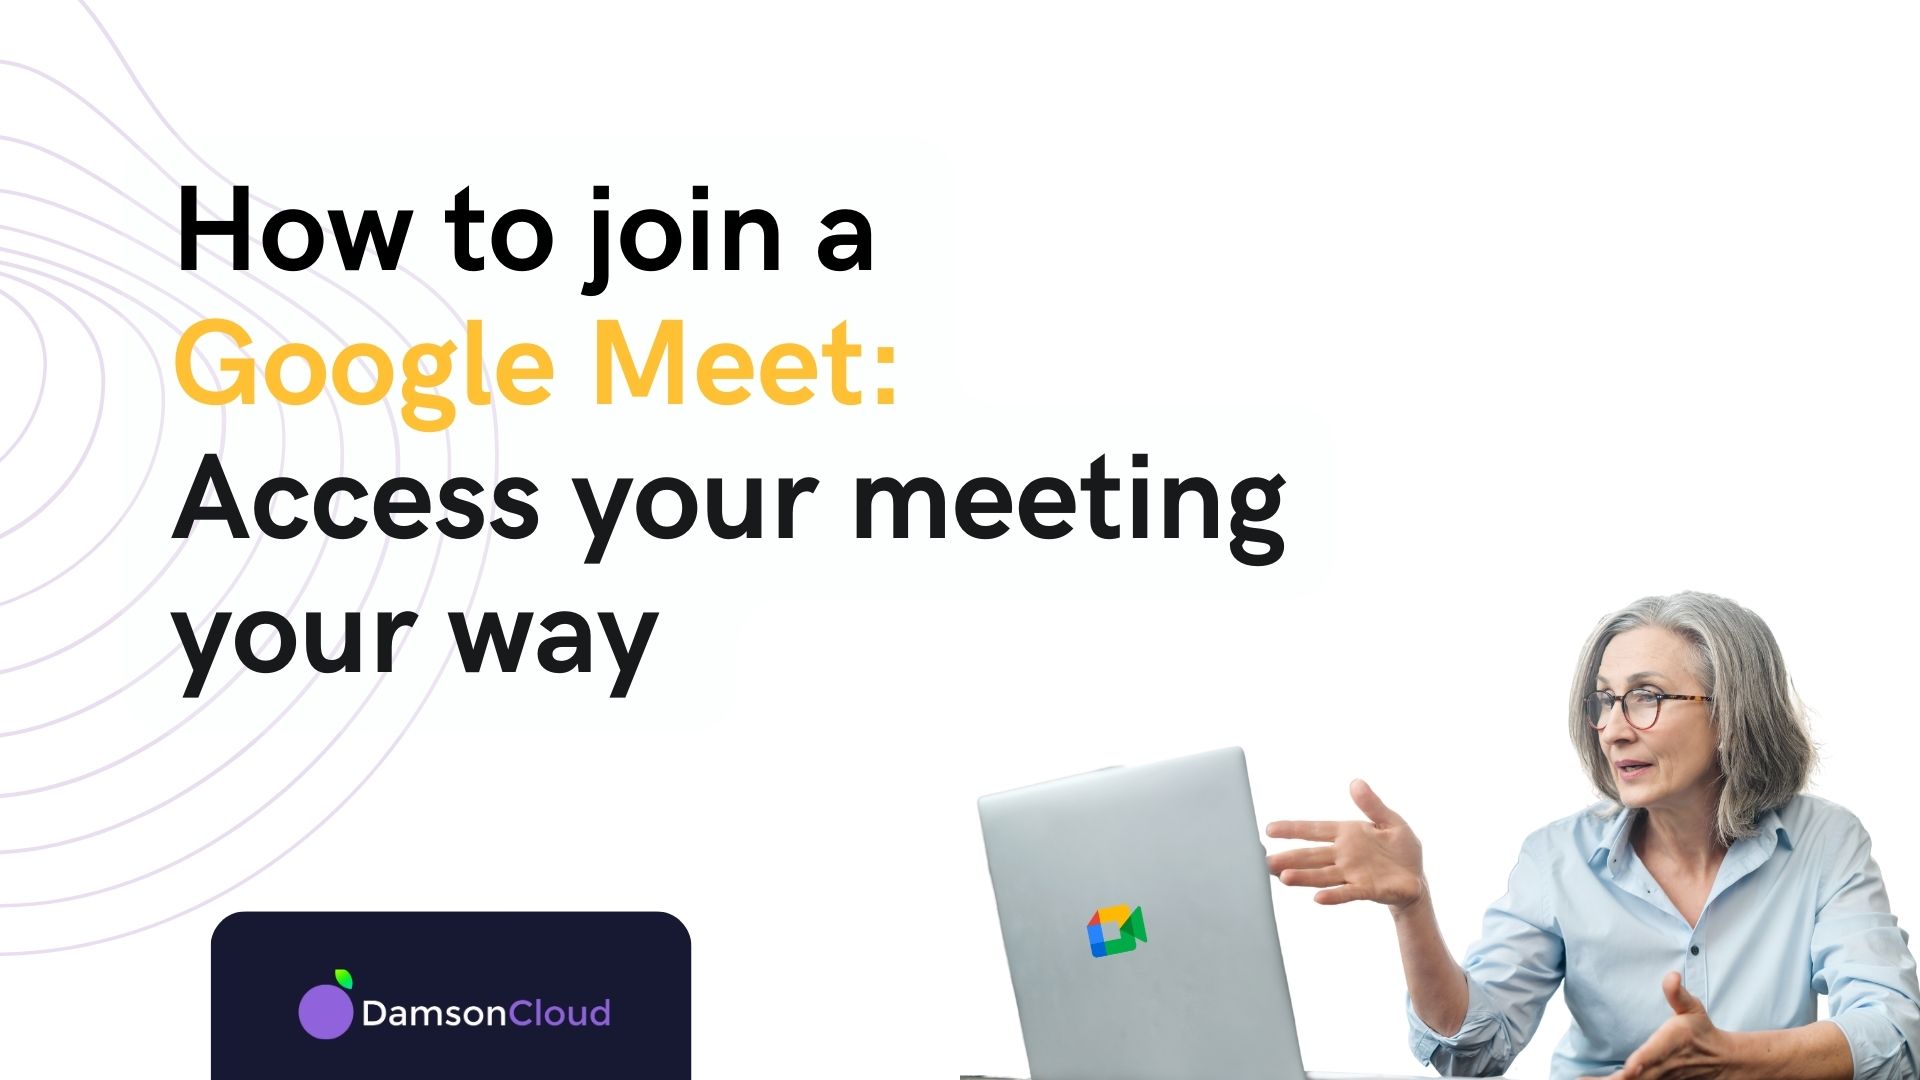 How to join a Google Meet and Access the Meeting